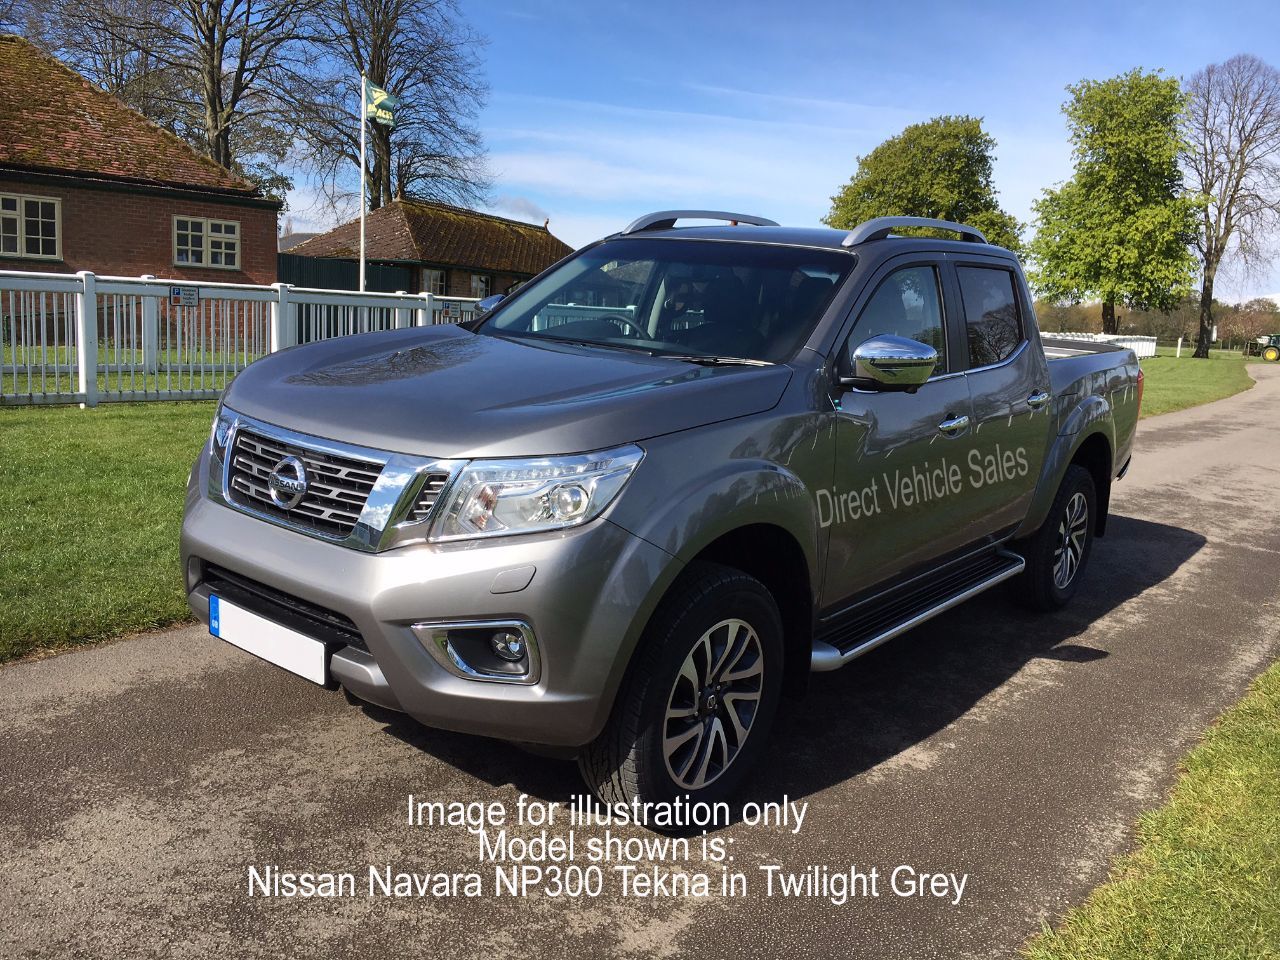 Nissan dealers in north yorkshire #7